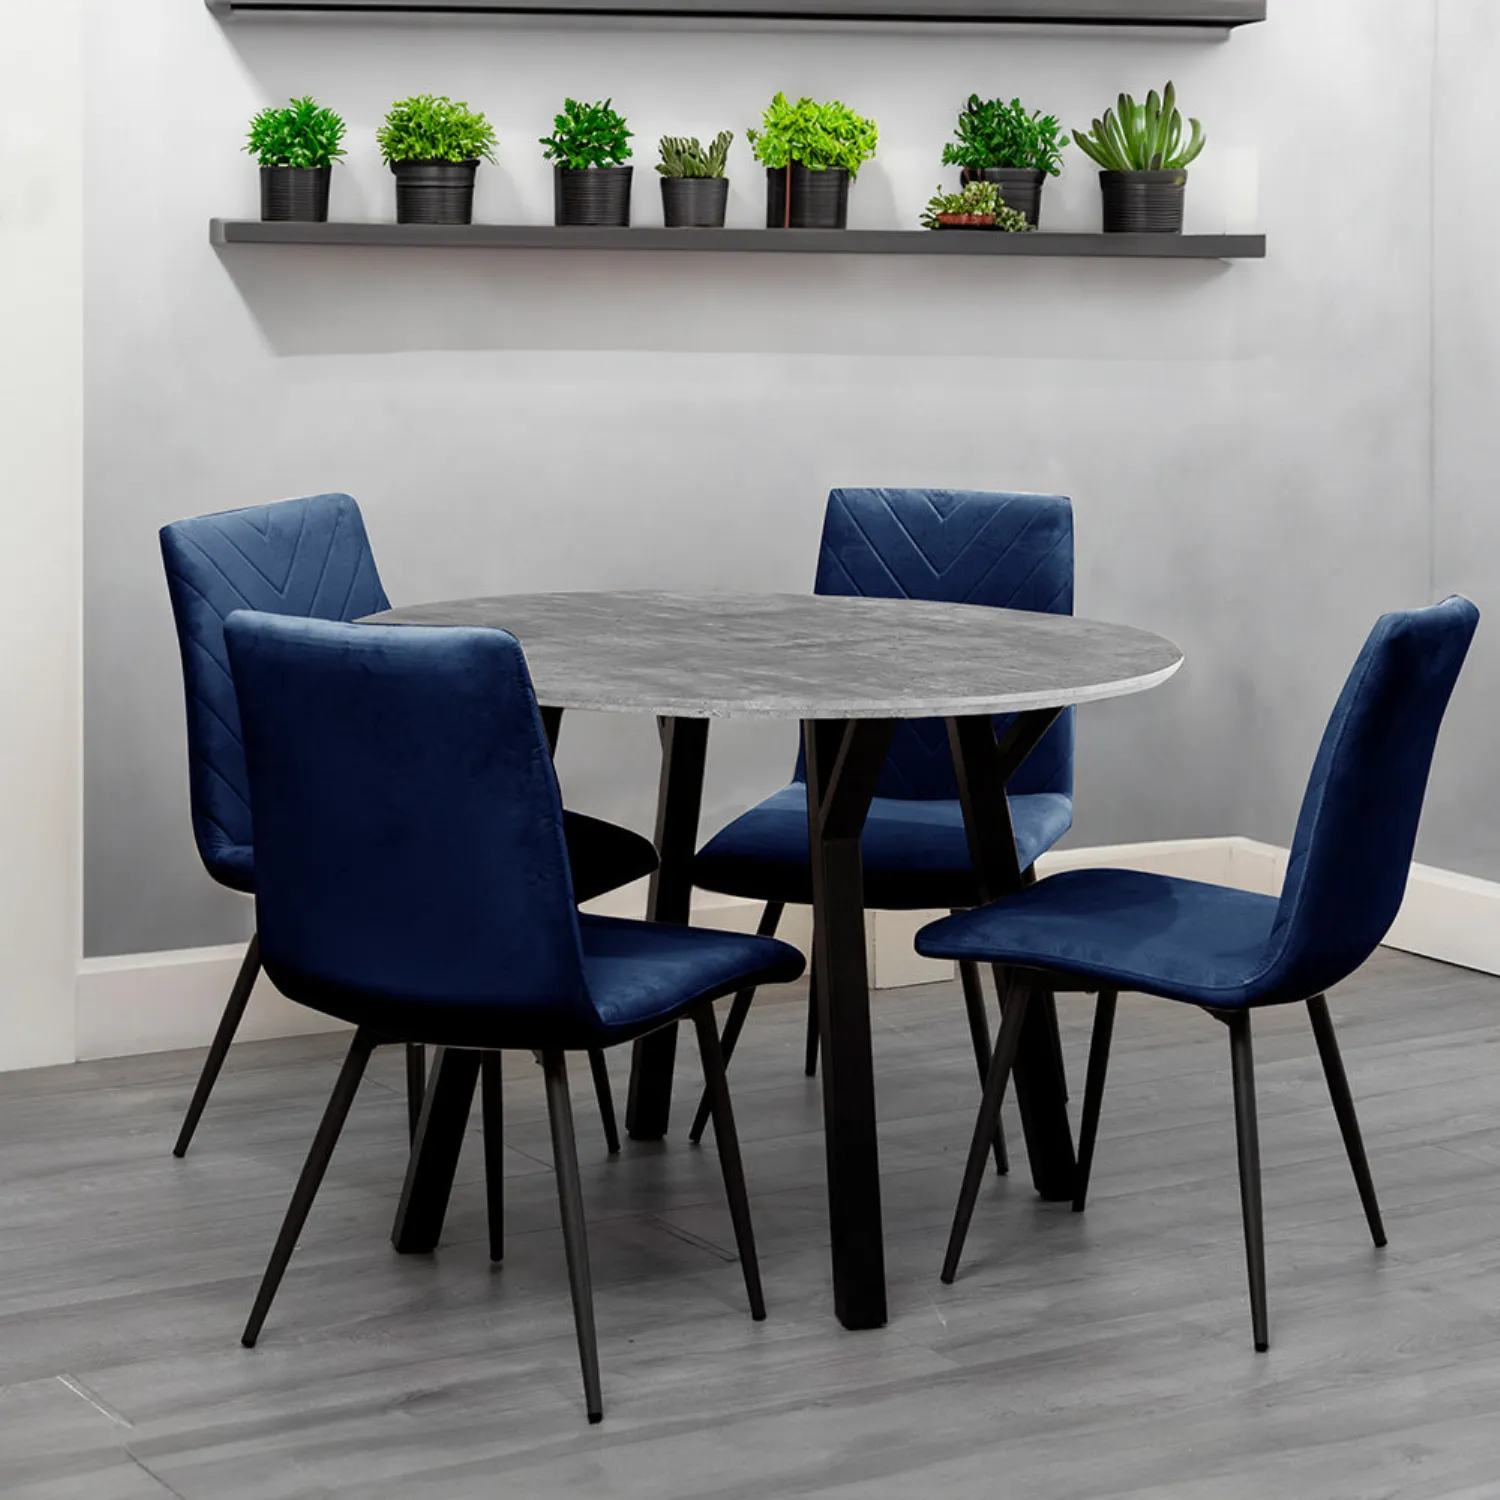 Dining Set 1.1m Concrete Round Table And 4 x Blue Chairs